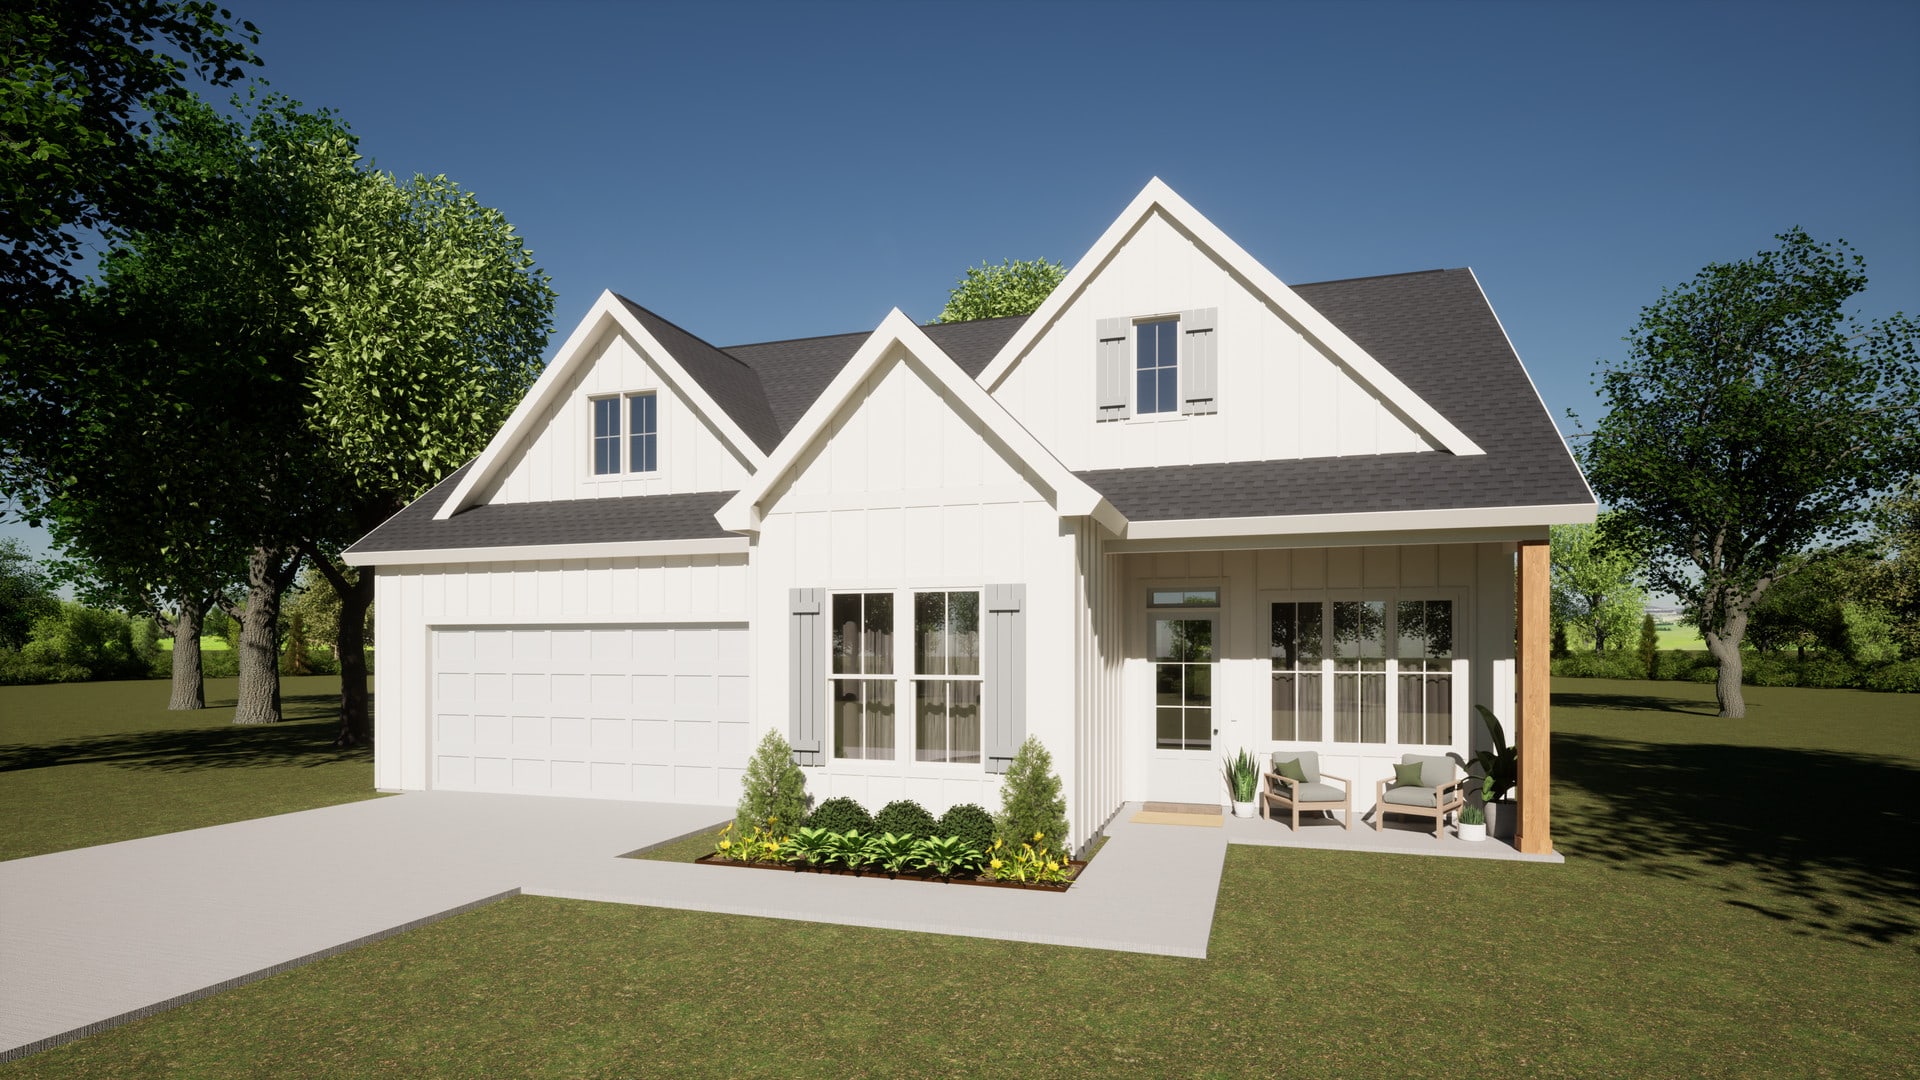 a rendering of a two story house with a garage.